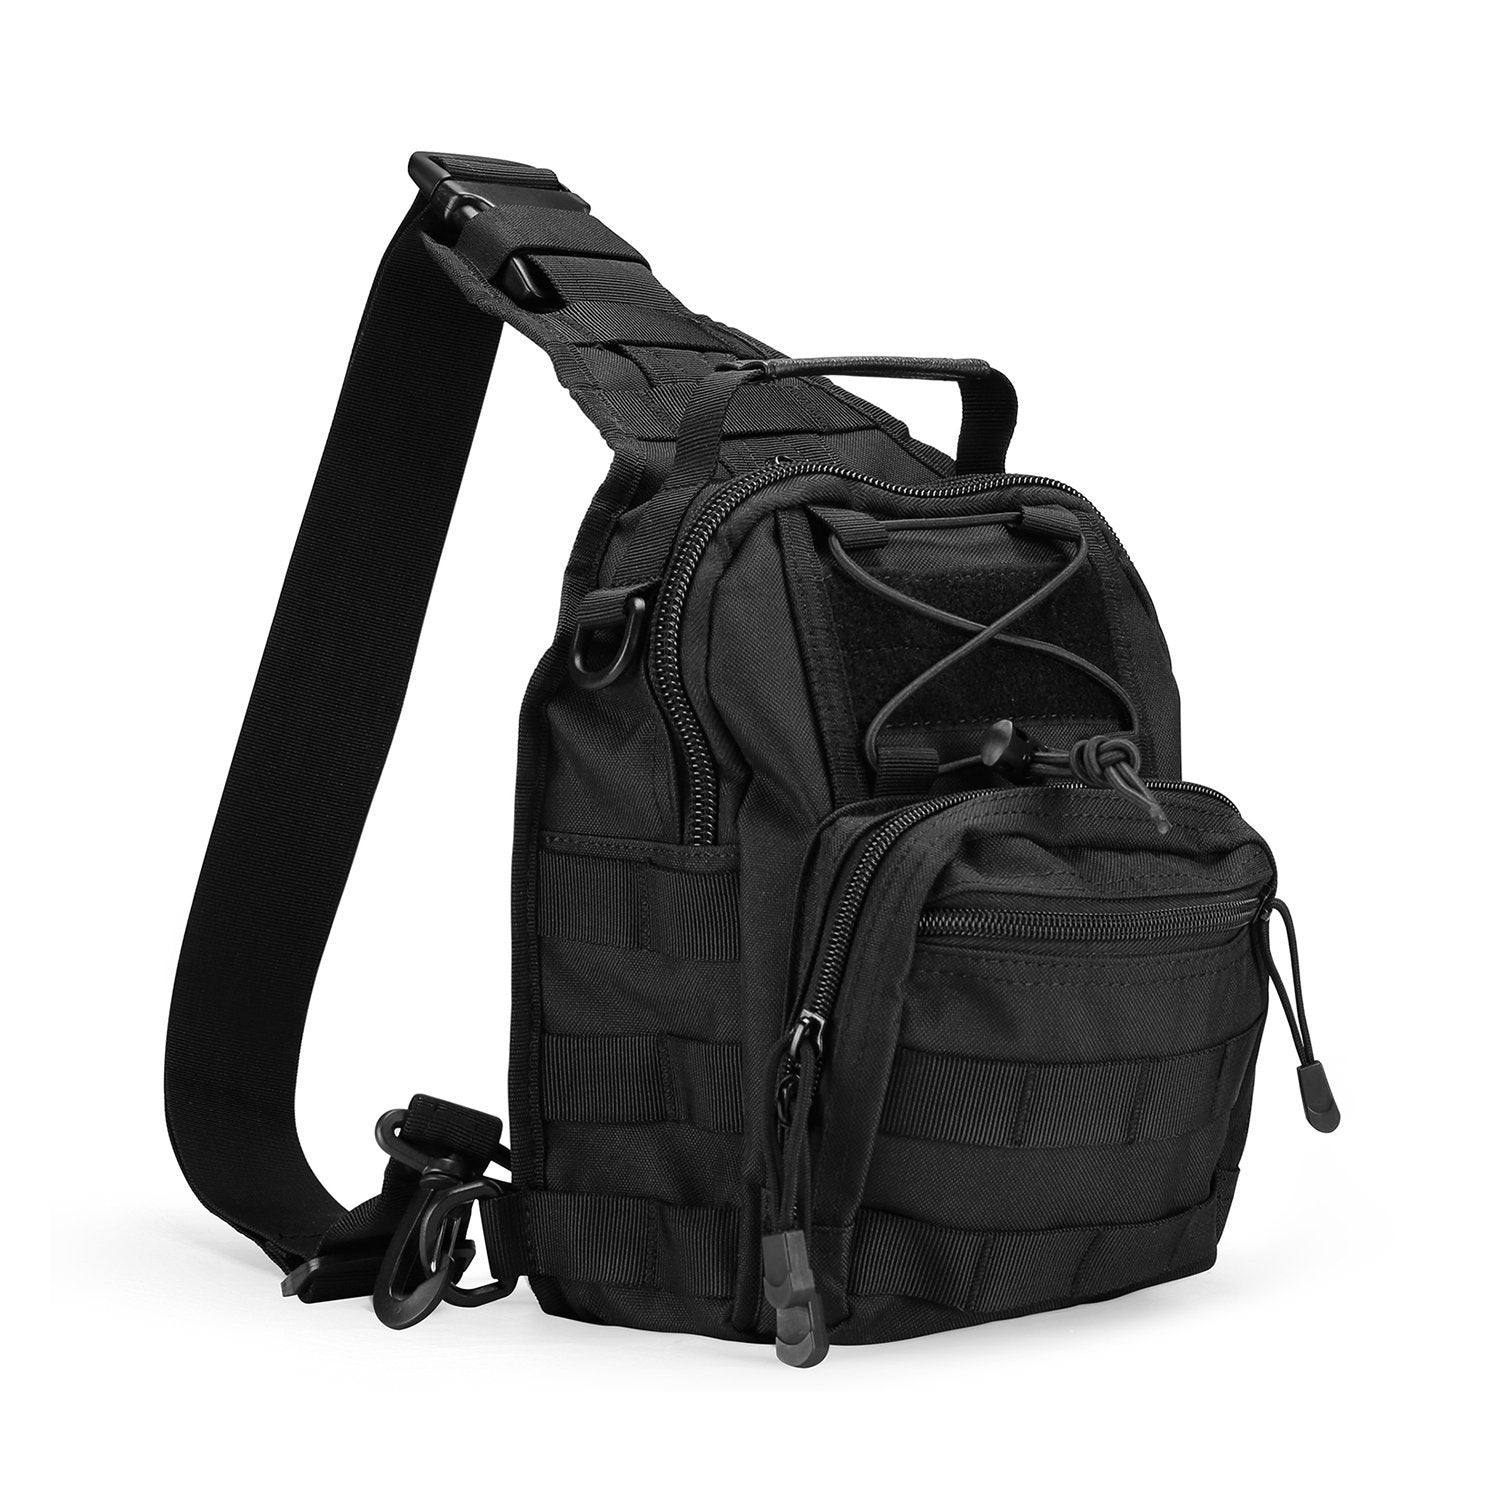 Tactical Sling Bag Pack with Pistol Holster